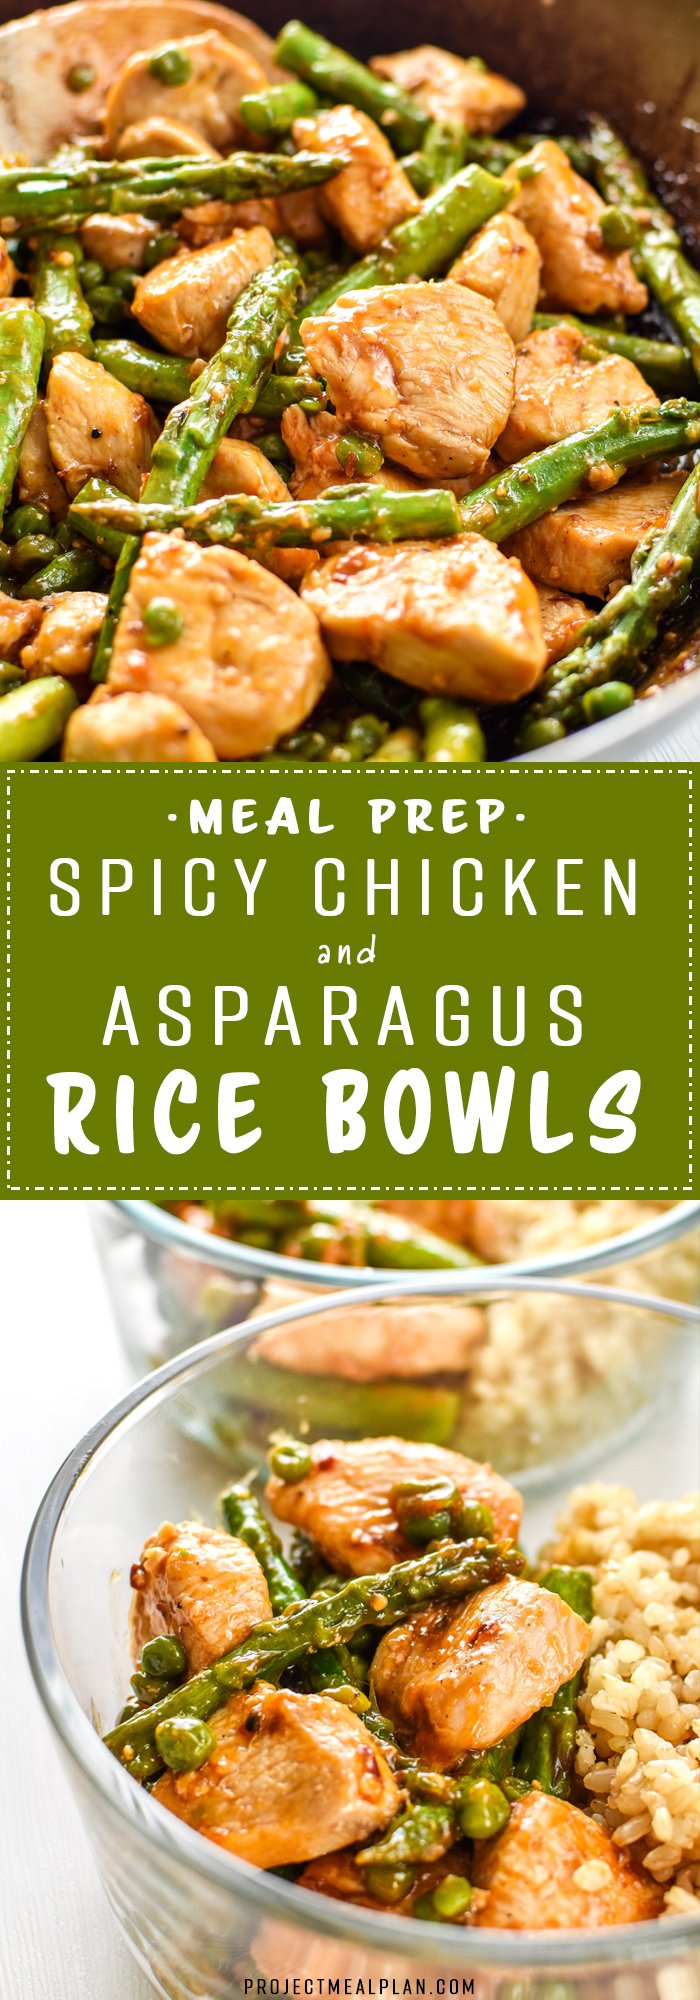 Meal Prep Spicy Chicken and Asparagus Rice Bowls - A simple stir-fry style recipe that's quick and easy to throw together. Pair with white or brown rice for the perfect Sunday Meal Prep bowls! - ProjectMealPlan.com